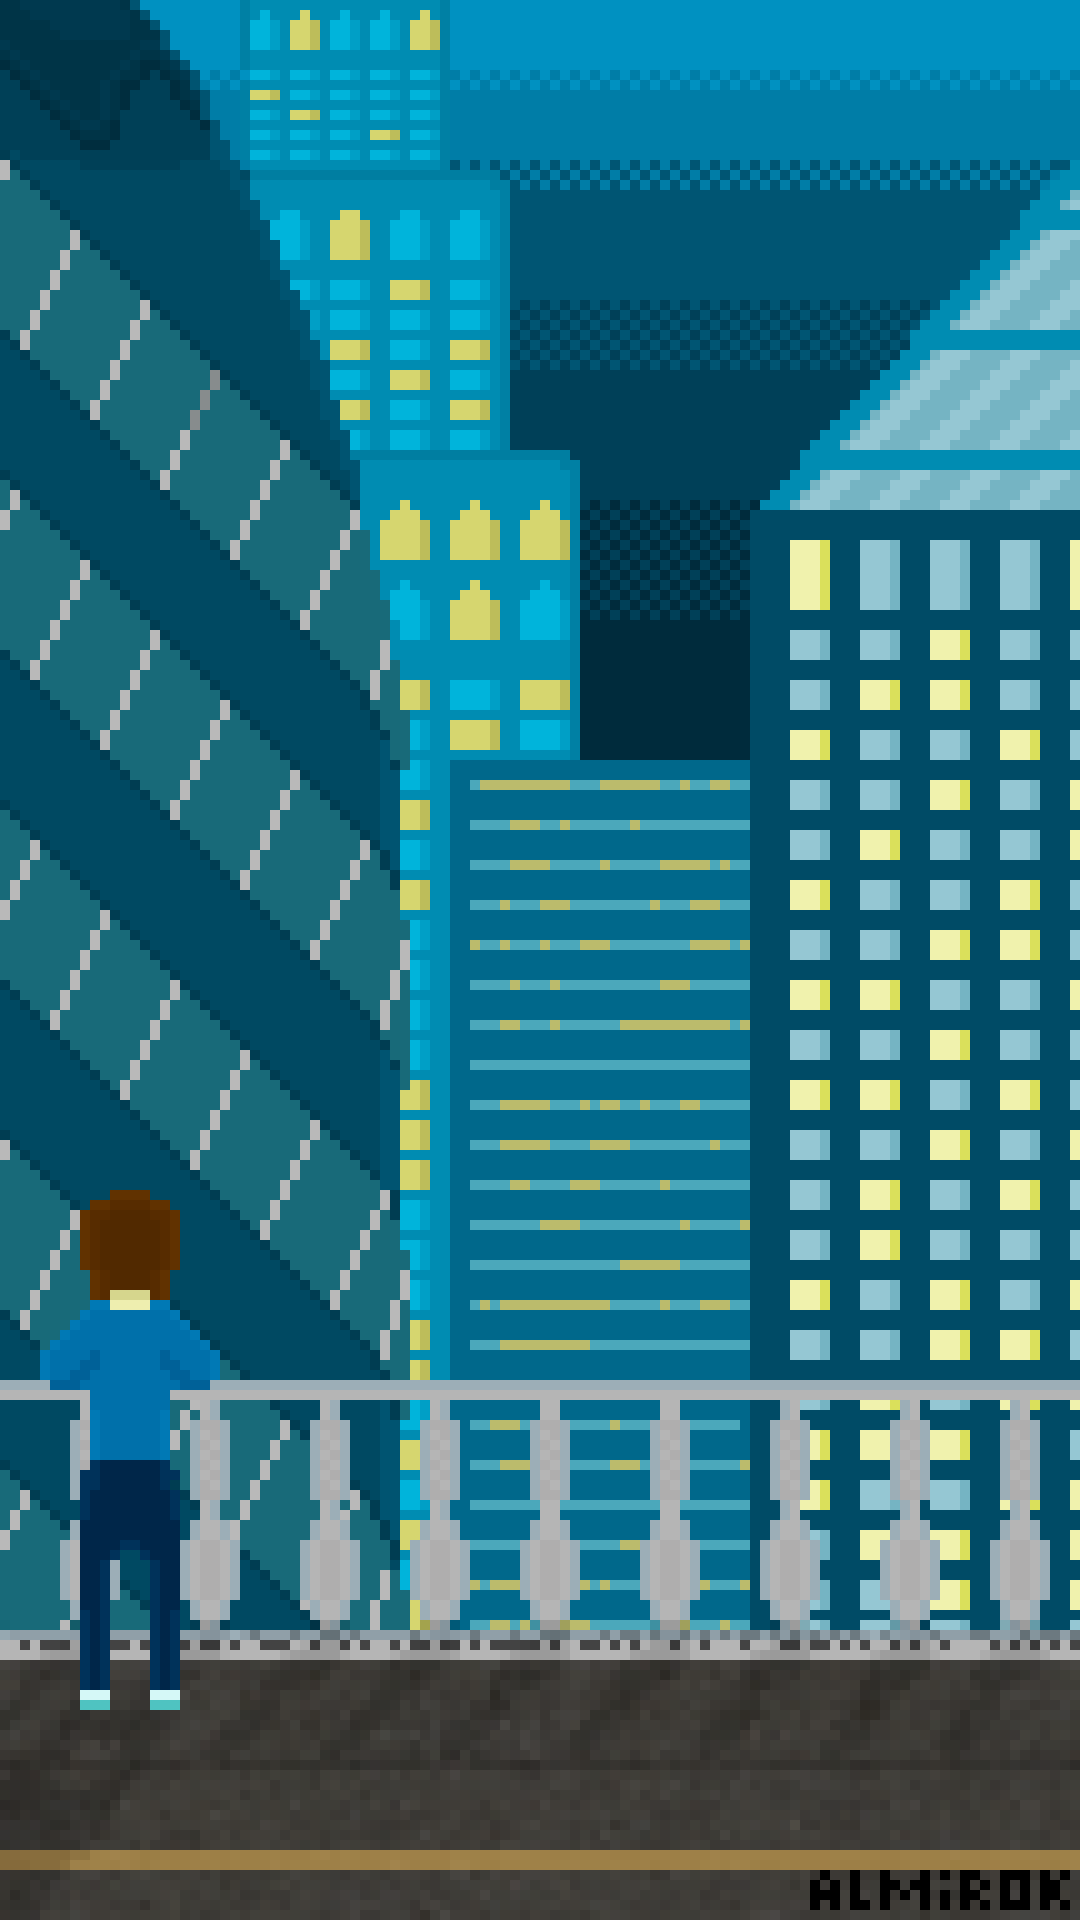 There are millions around, and you are alone - Drawing, My, Loneliness, Town, Pixel Art